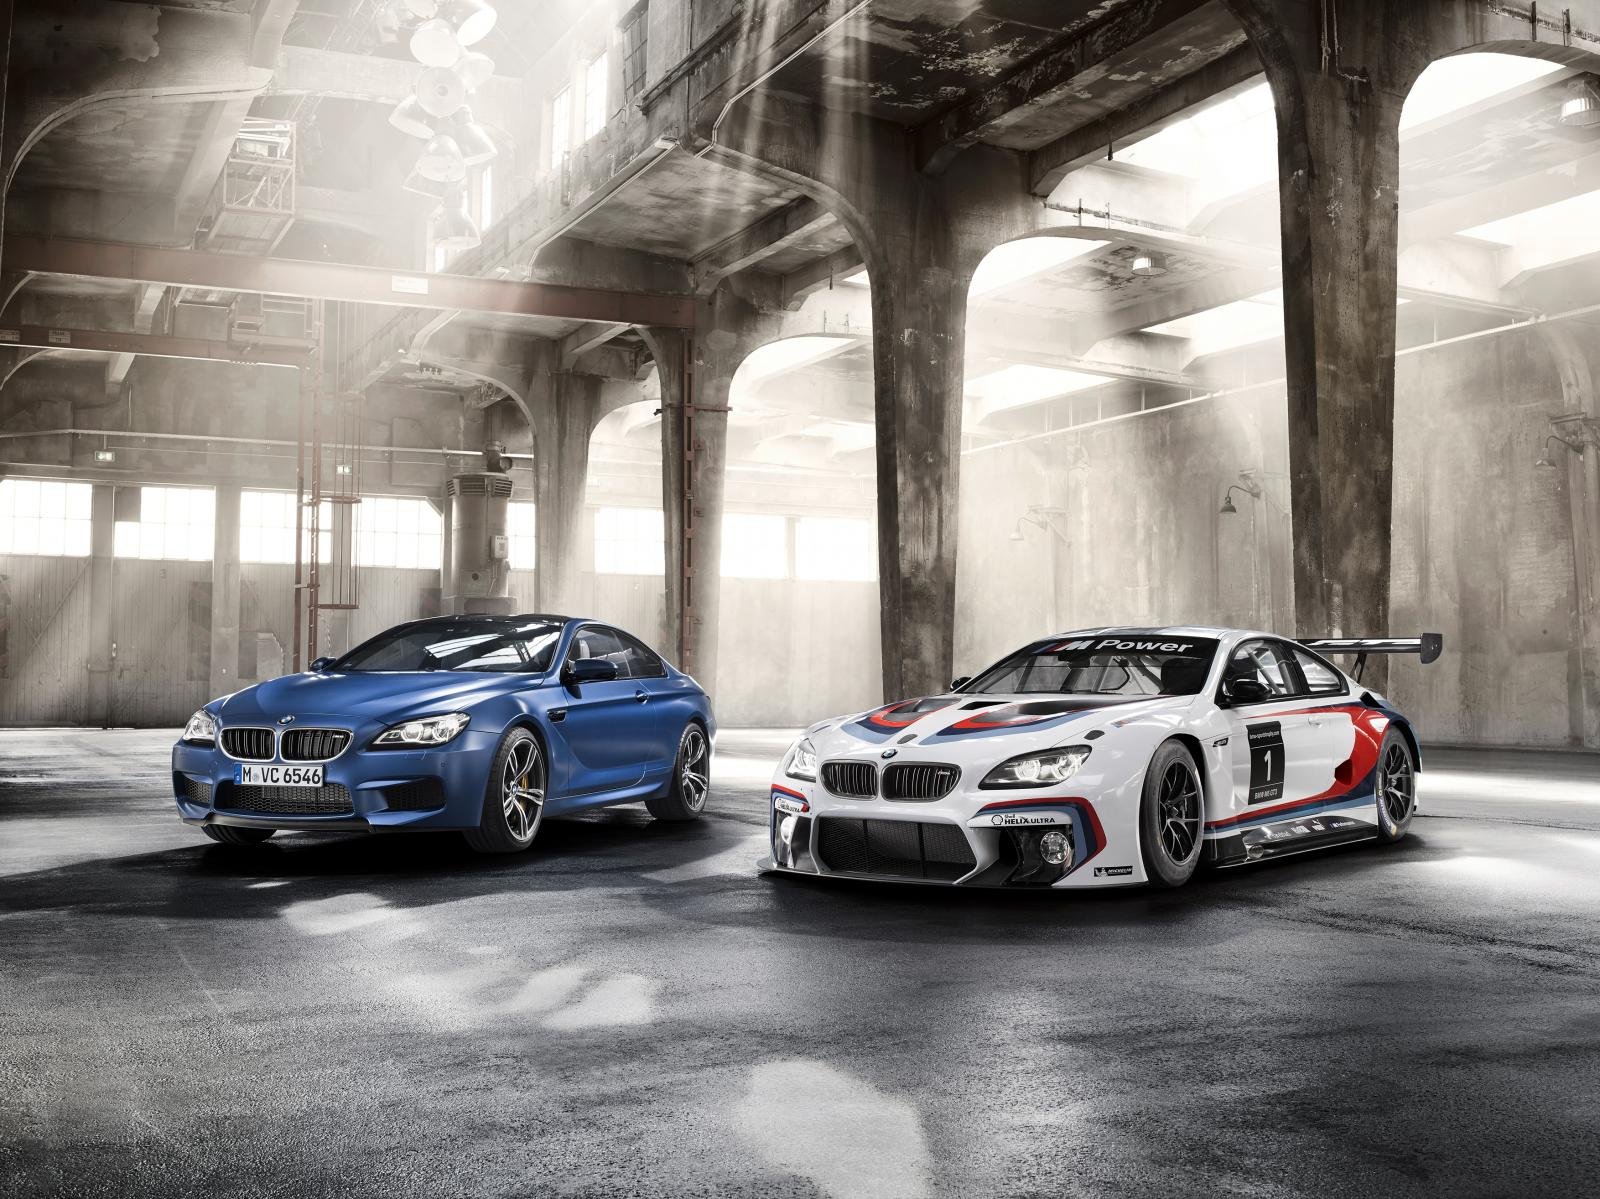 bmw m6, Gt3, Coupe, Cars, Racecars, 2016 Wallpaper